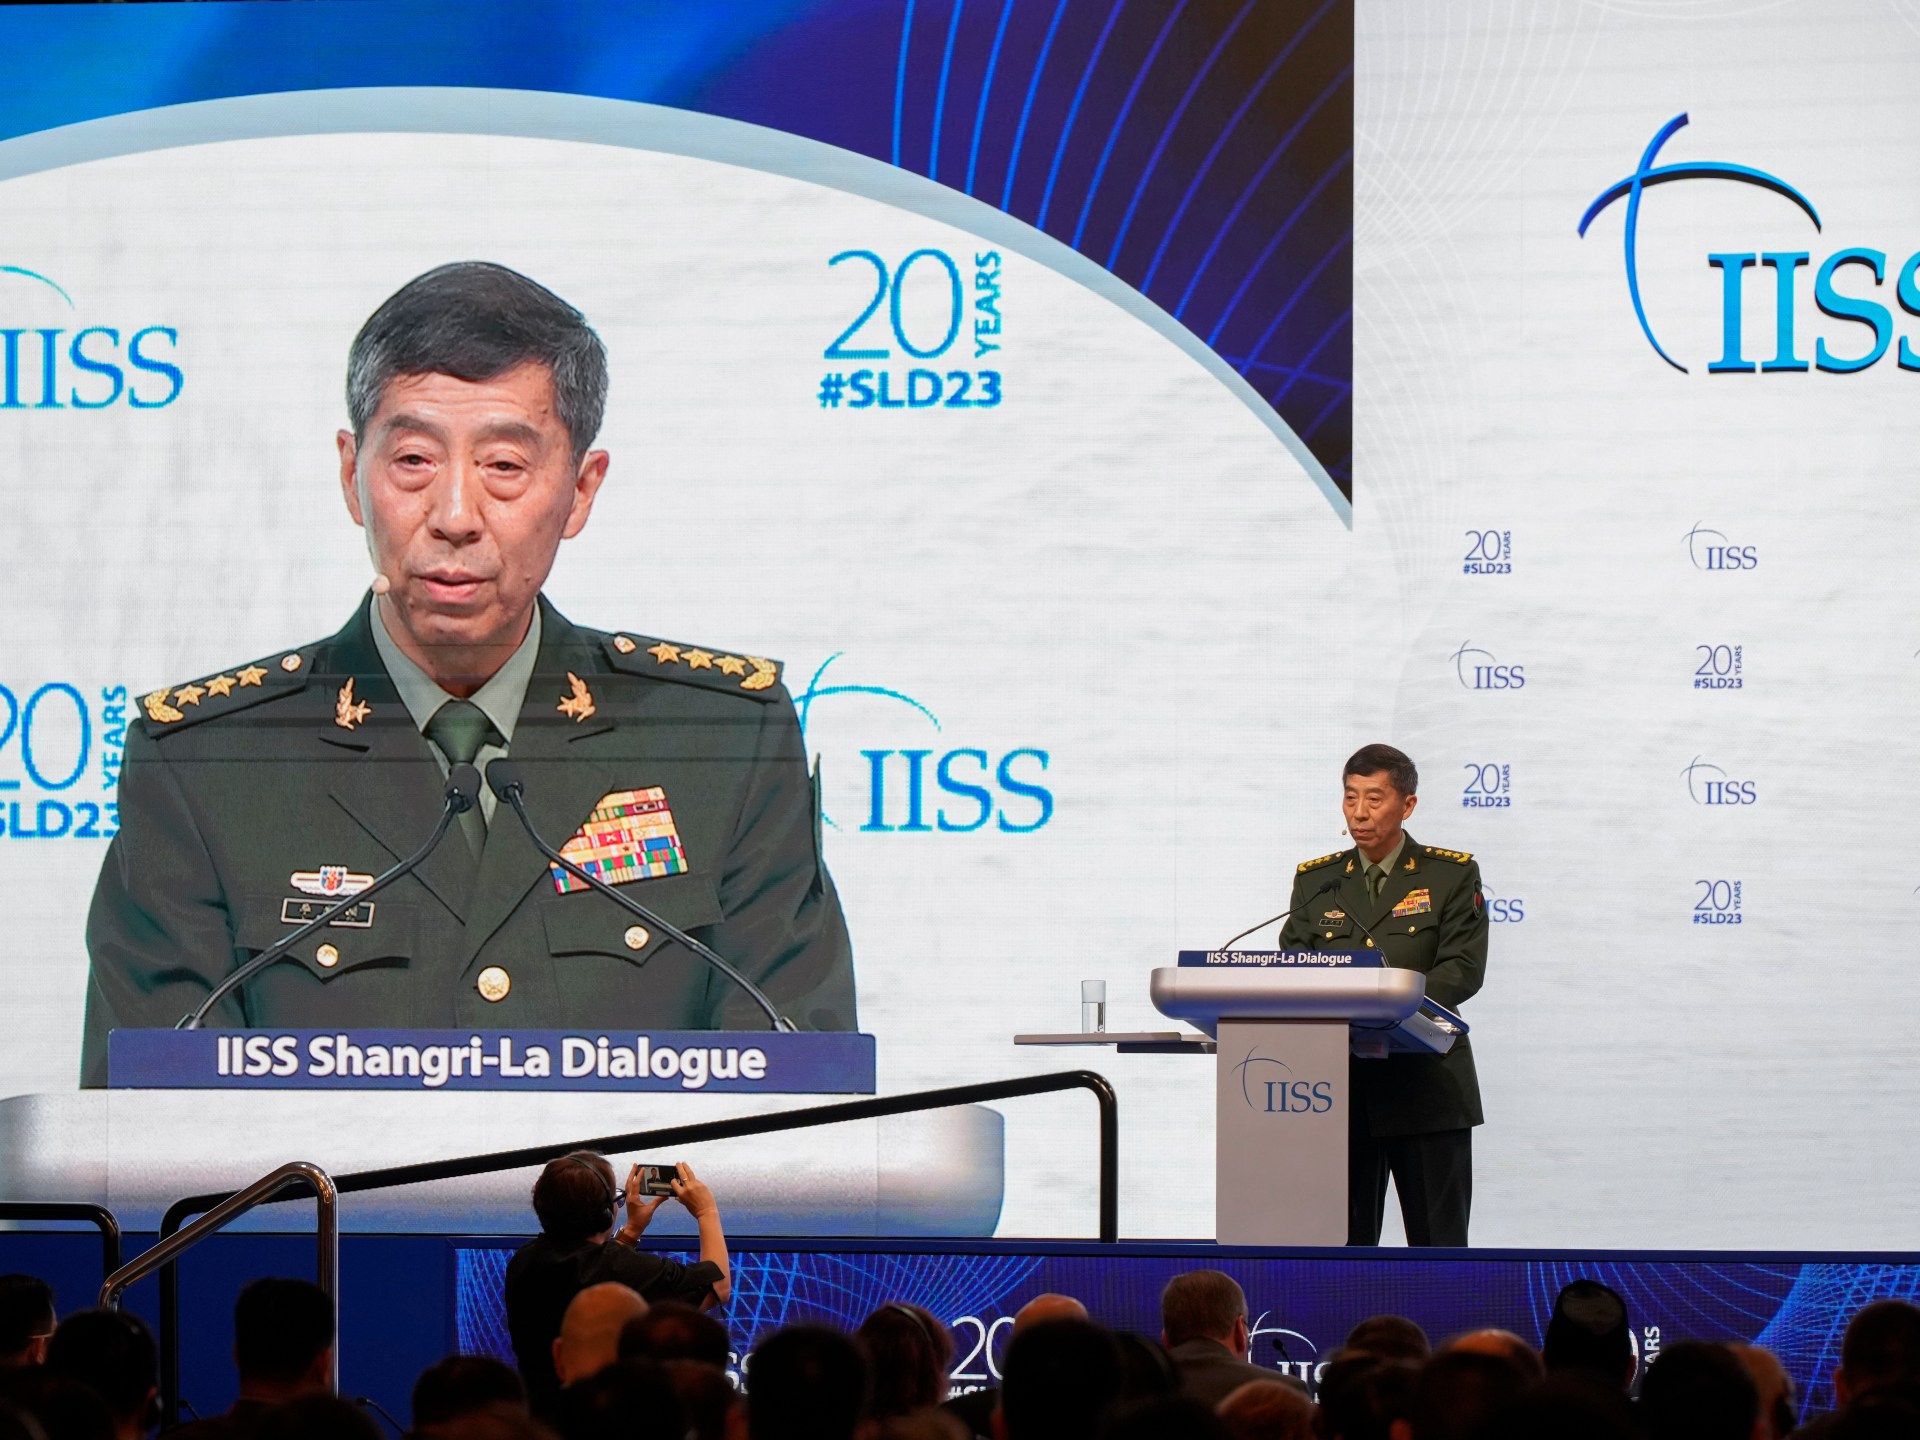 Chinas Li Says a Clash with the United States Will Bring Unbearable Disaster |  Military news